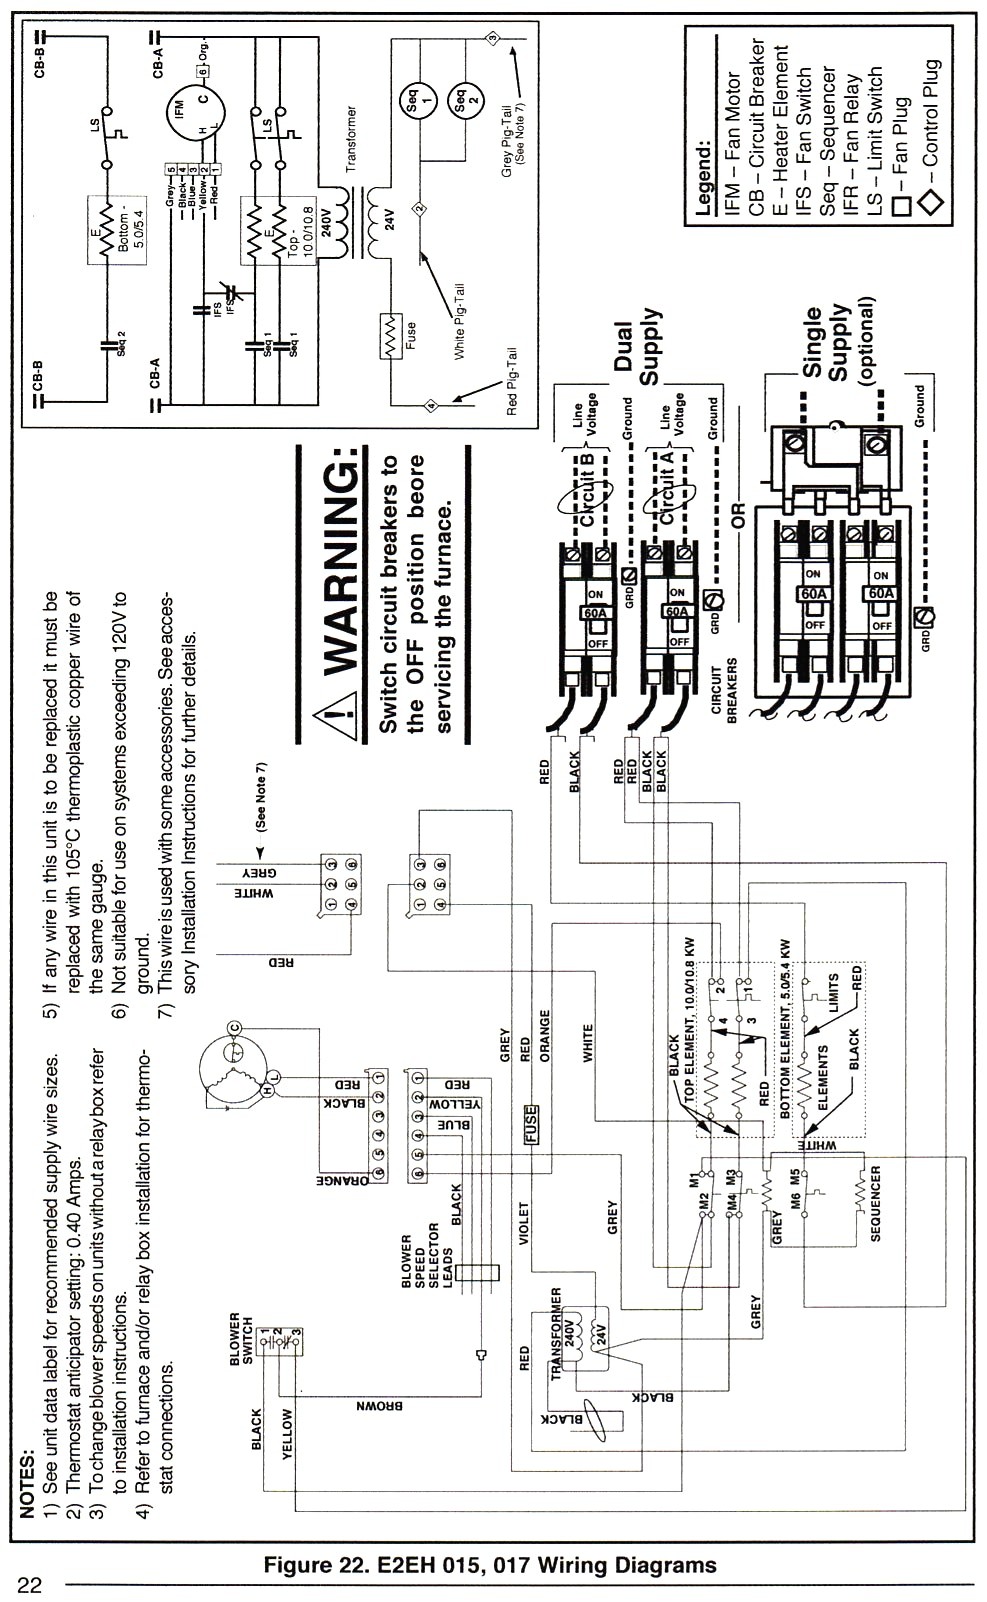 Intertherm Electric Furnace Wiring Diagram For Nordyne Heat Pump Showy